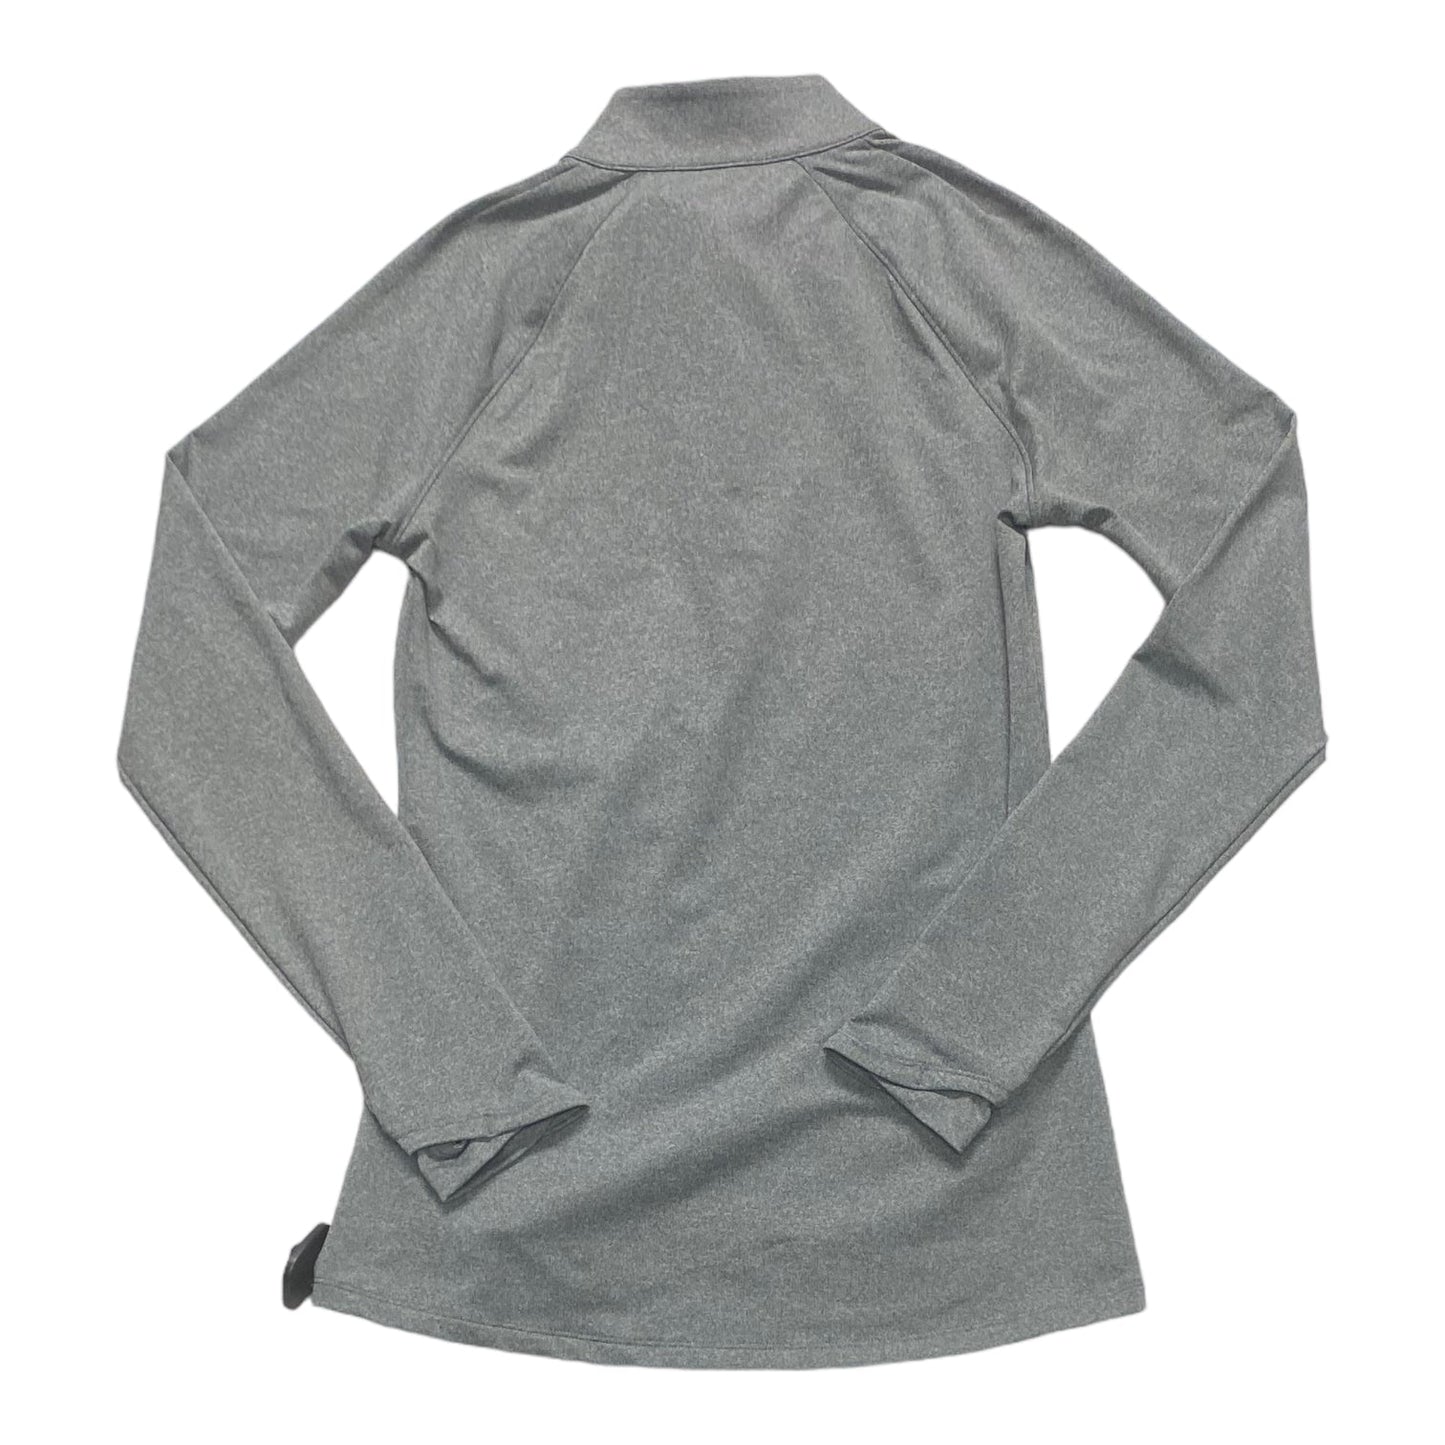 Grey Athletic Top Long Sleeve Collar Under Armour, Size S